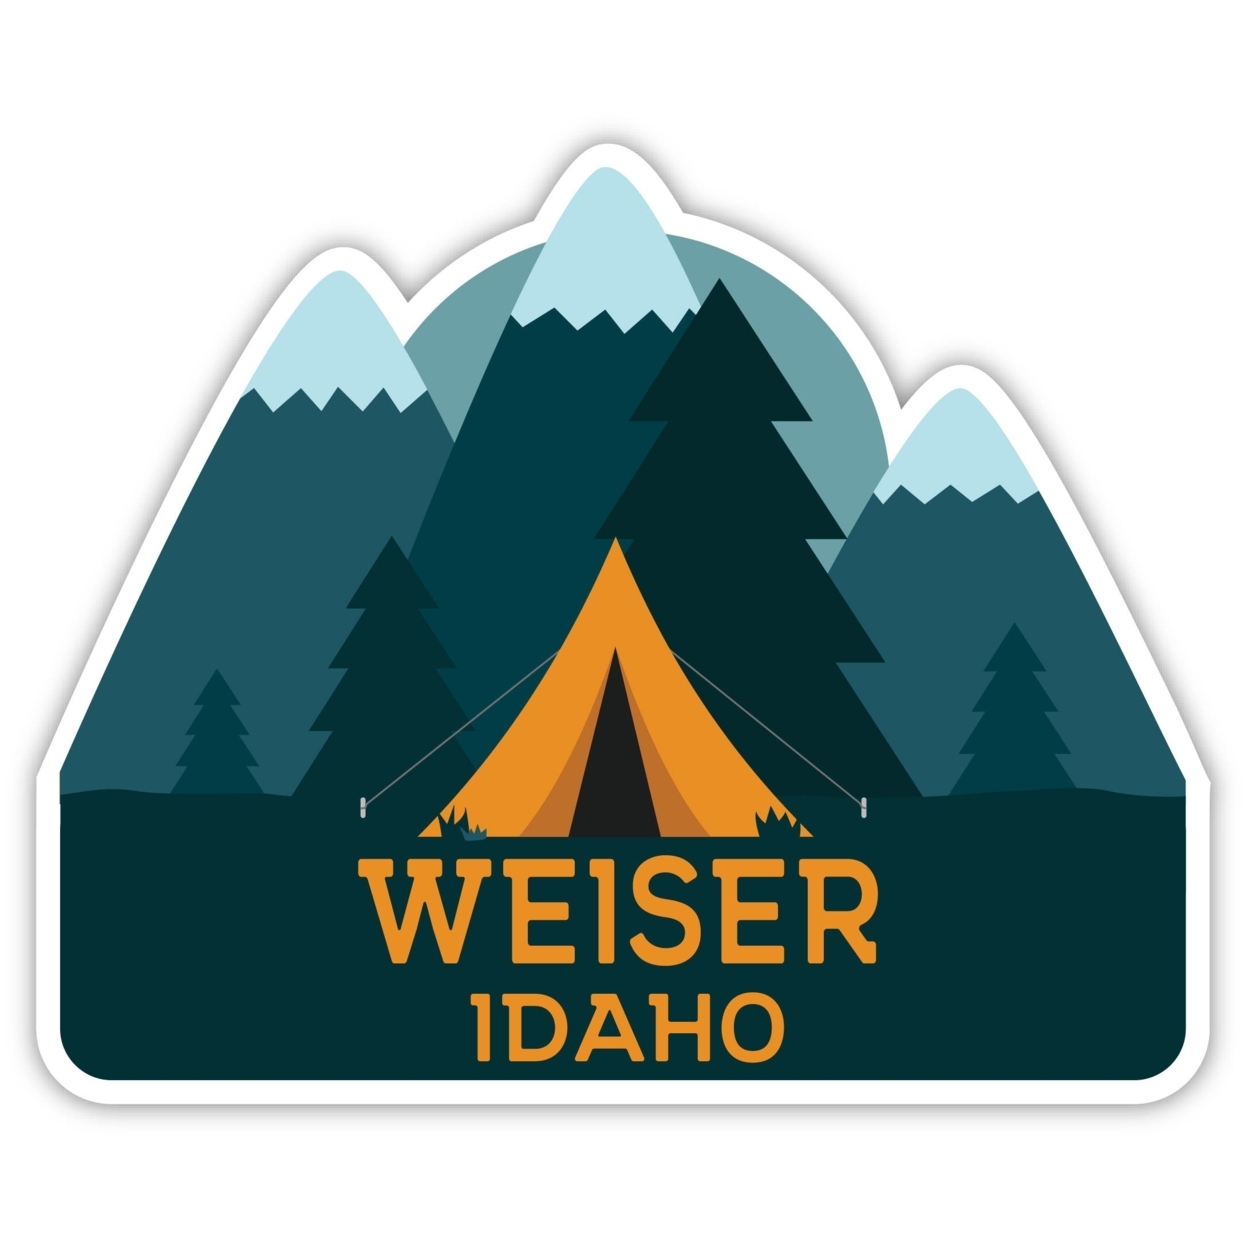 Weiser Idaho Souvenir Decorative Stickers (Choose Theme And Size) - Single Unit, 2-Inch, Tent